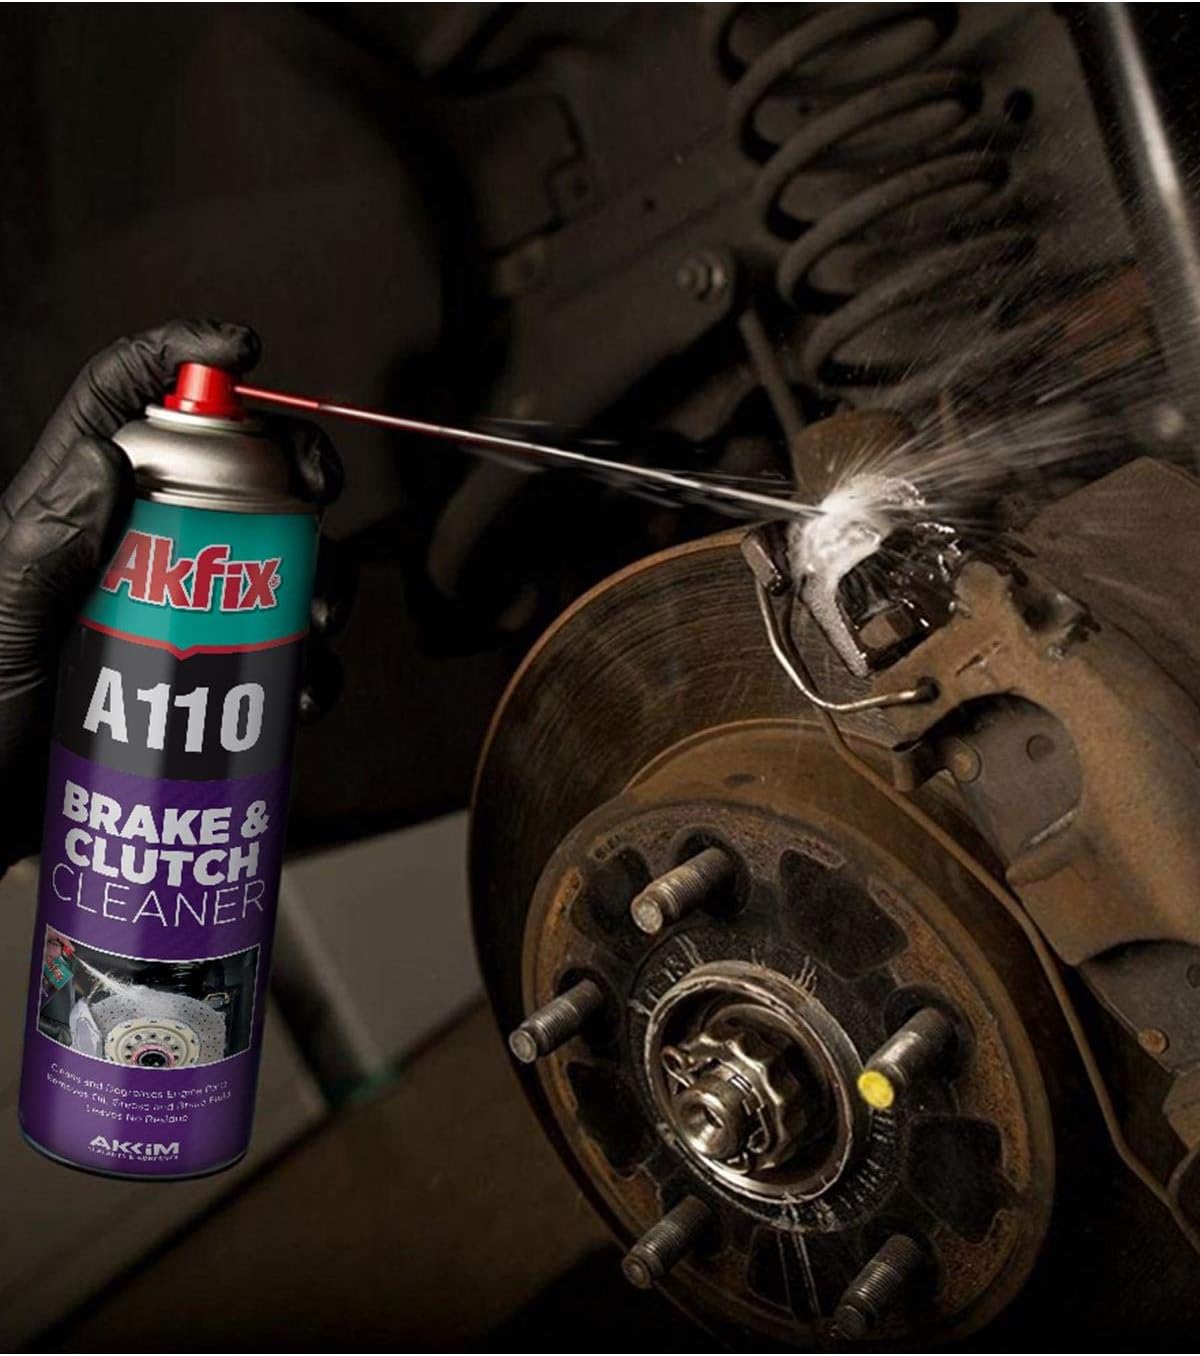 Akfix A110 Brake Parts Cleaner - Strong Dust and Rust Remover, Brake Cleaner Spray Can, Super Clean Metal Degreaser, Hand Cleaner for Auto Mechanics